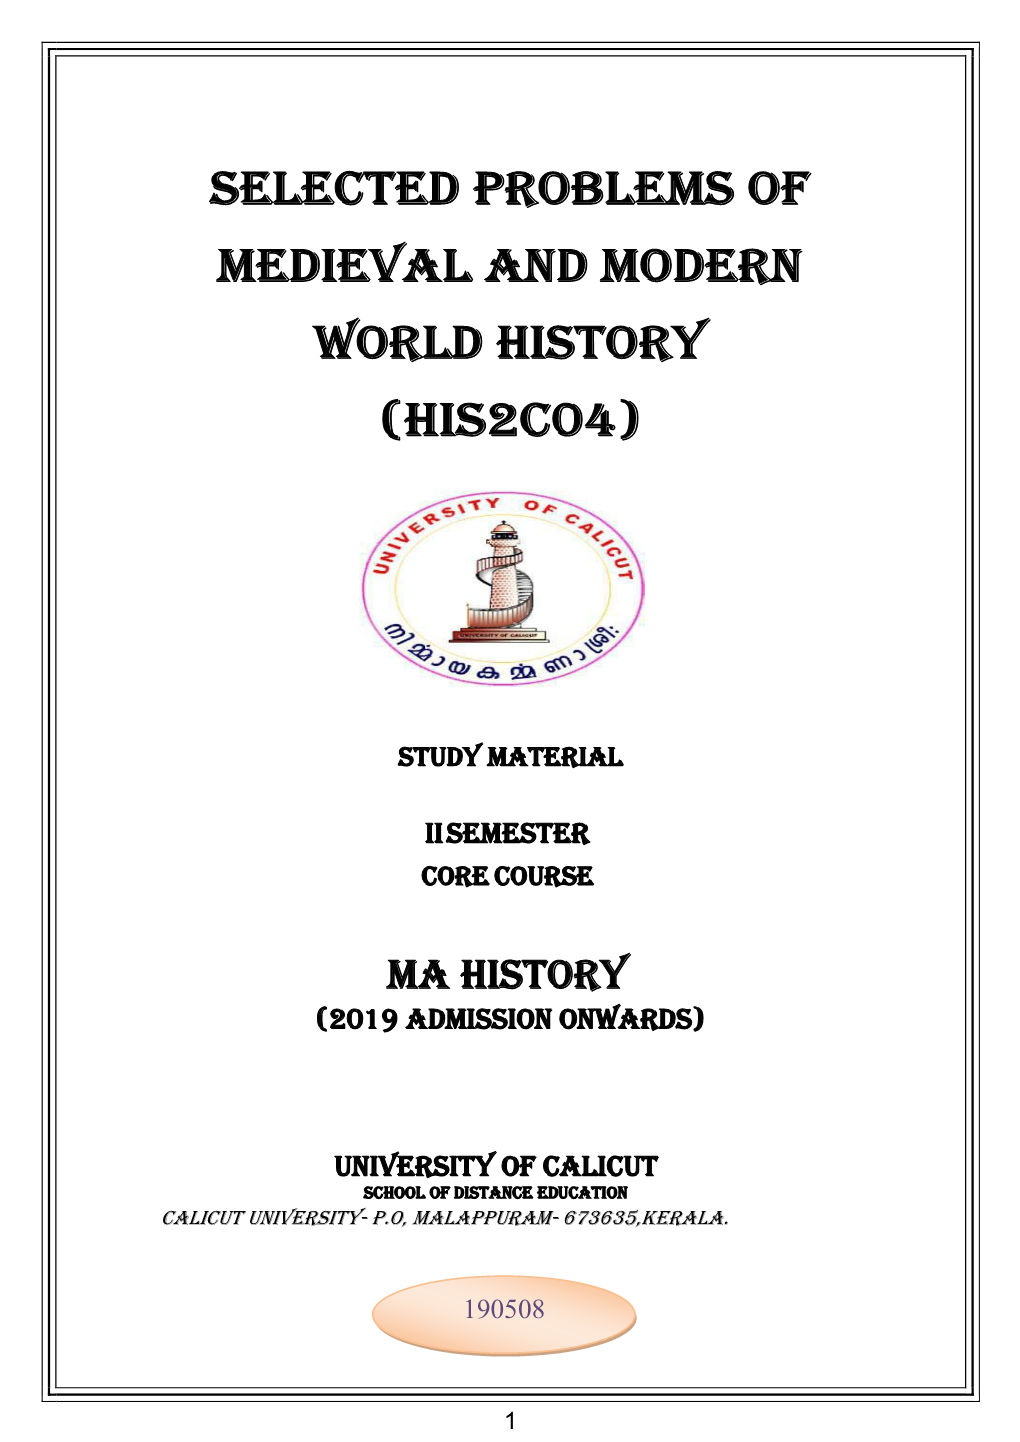 Selected Problems of Medieval and Modern World History (His2c04)